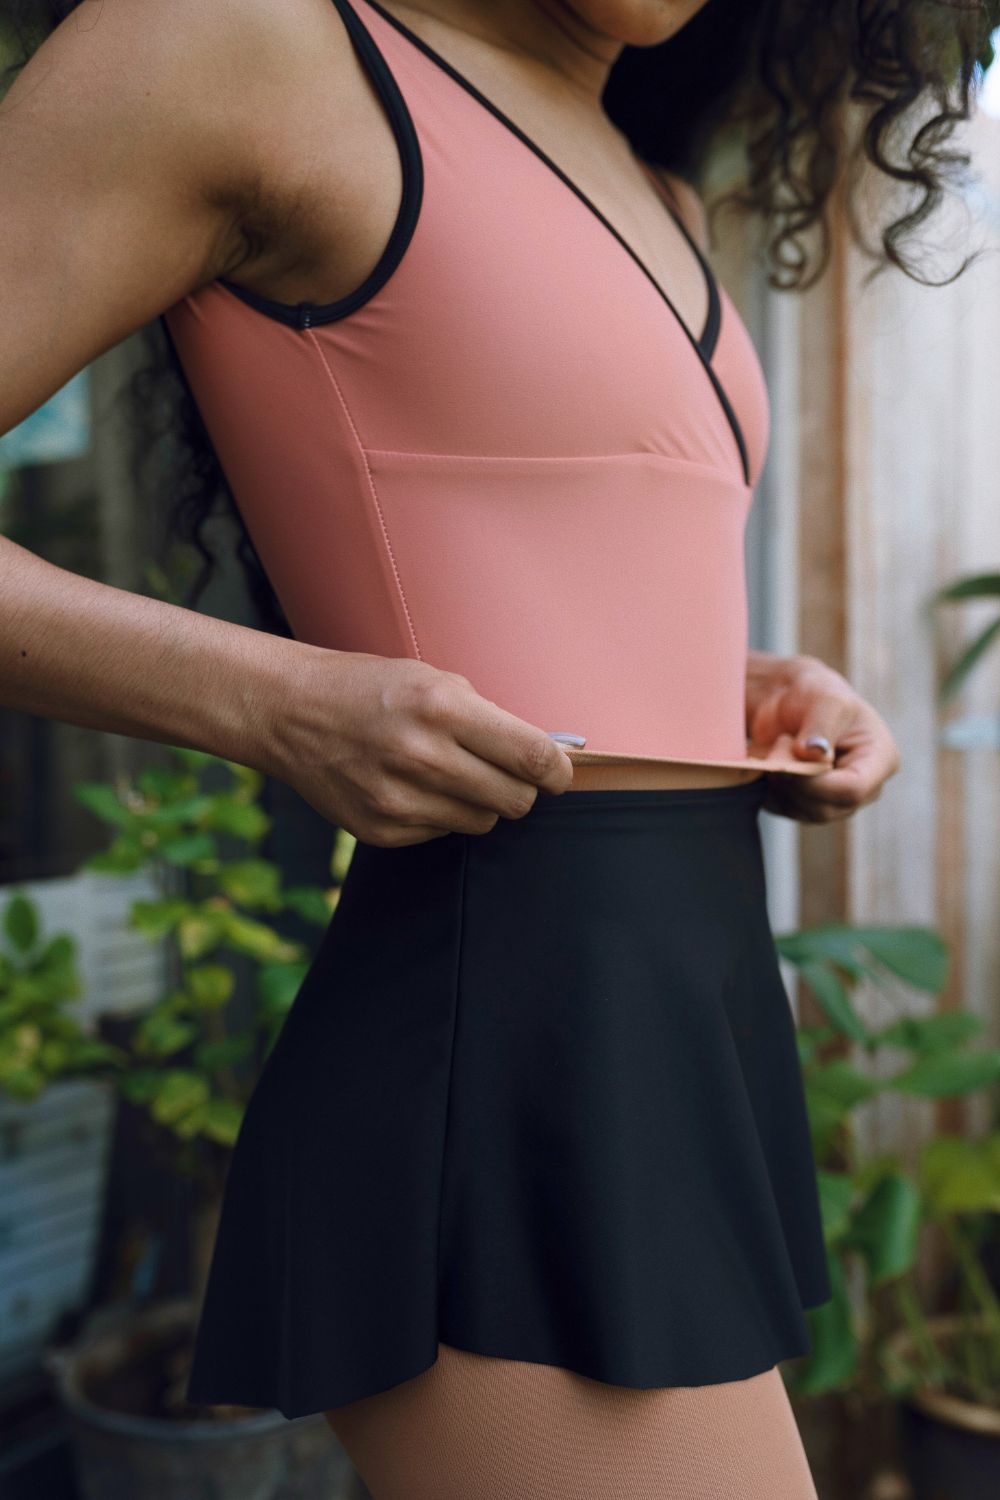 Women's Marseille Wrap Front Ballet Leotard – Porcelain Peachy with black trimim - New, Sleeveless - Imperfect Pointes with matching black skirt worning by Mikayla Isaacs Ballet Black 